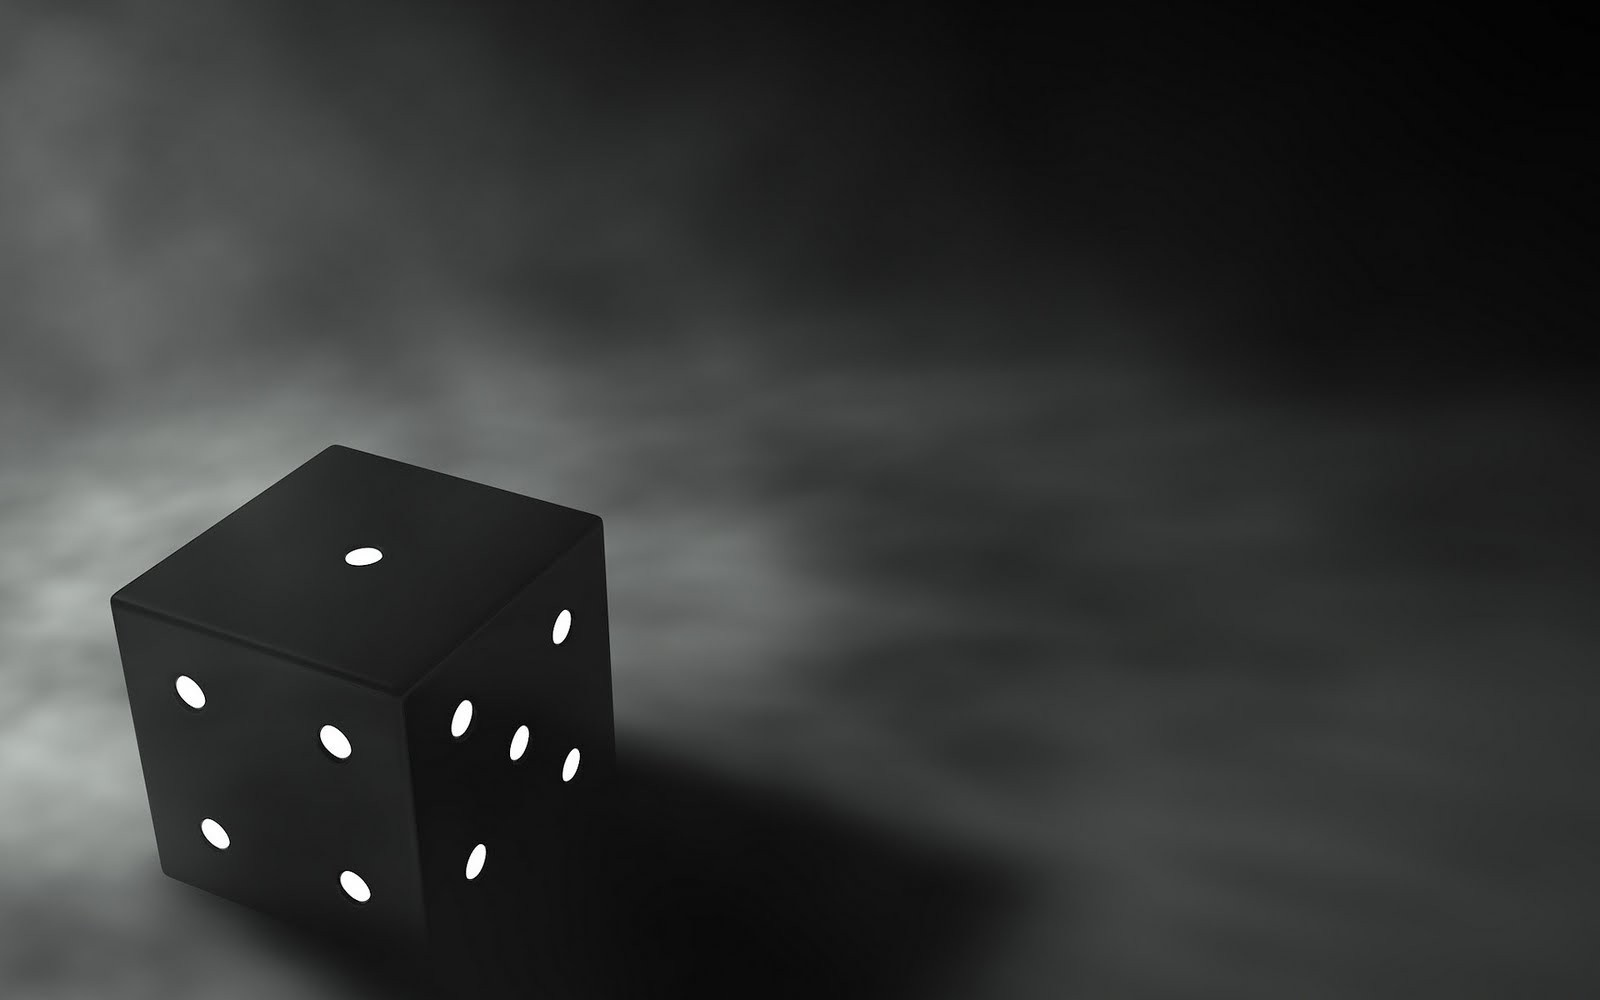 white, black, monochrome, simple background, dice, light, hand, shape, darkness, screenshot, computer wallpaper, black and white, monochrome photography, close up, indoor games and sports, macro photography Gallery HD Wallpaper